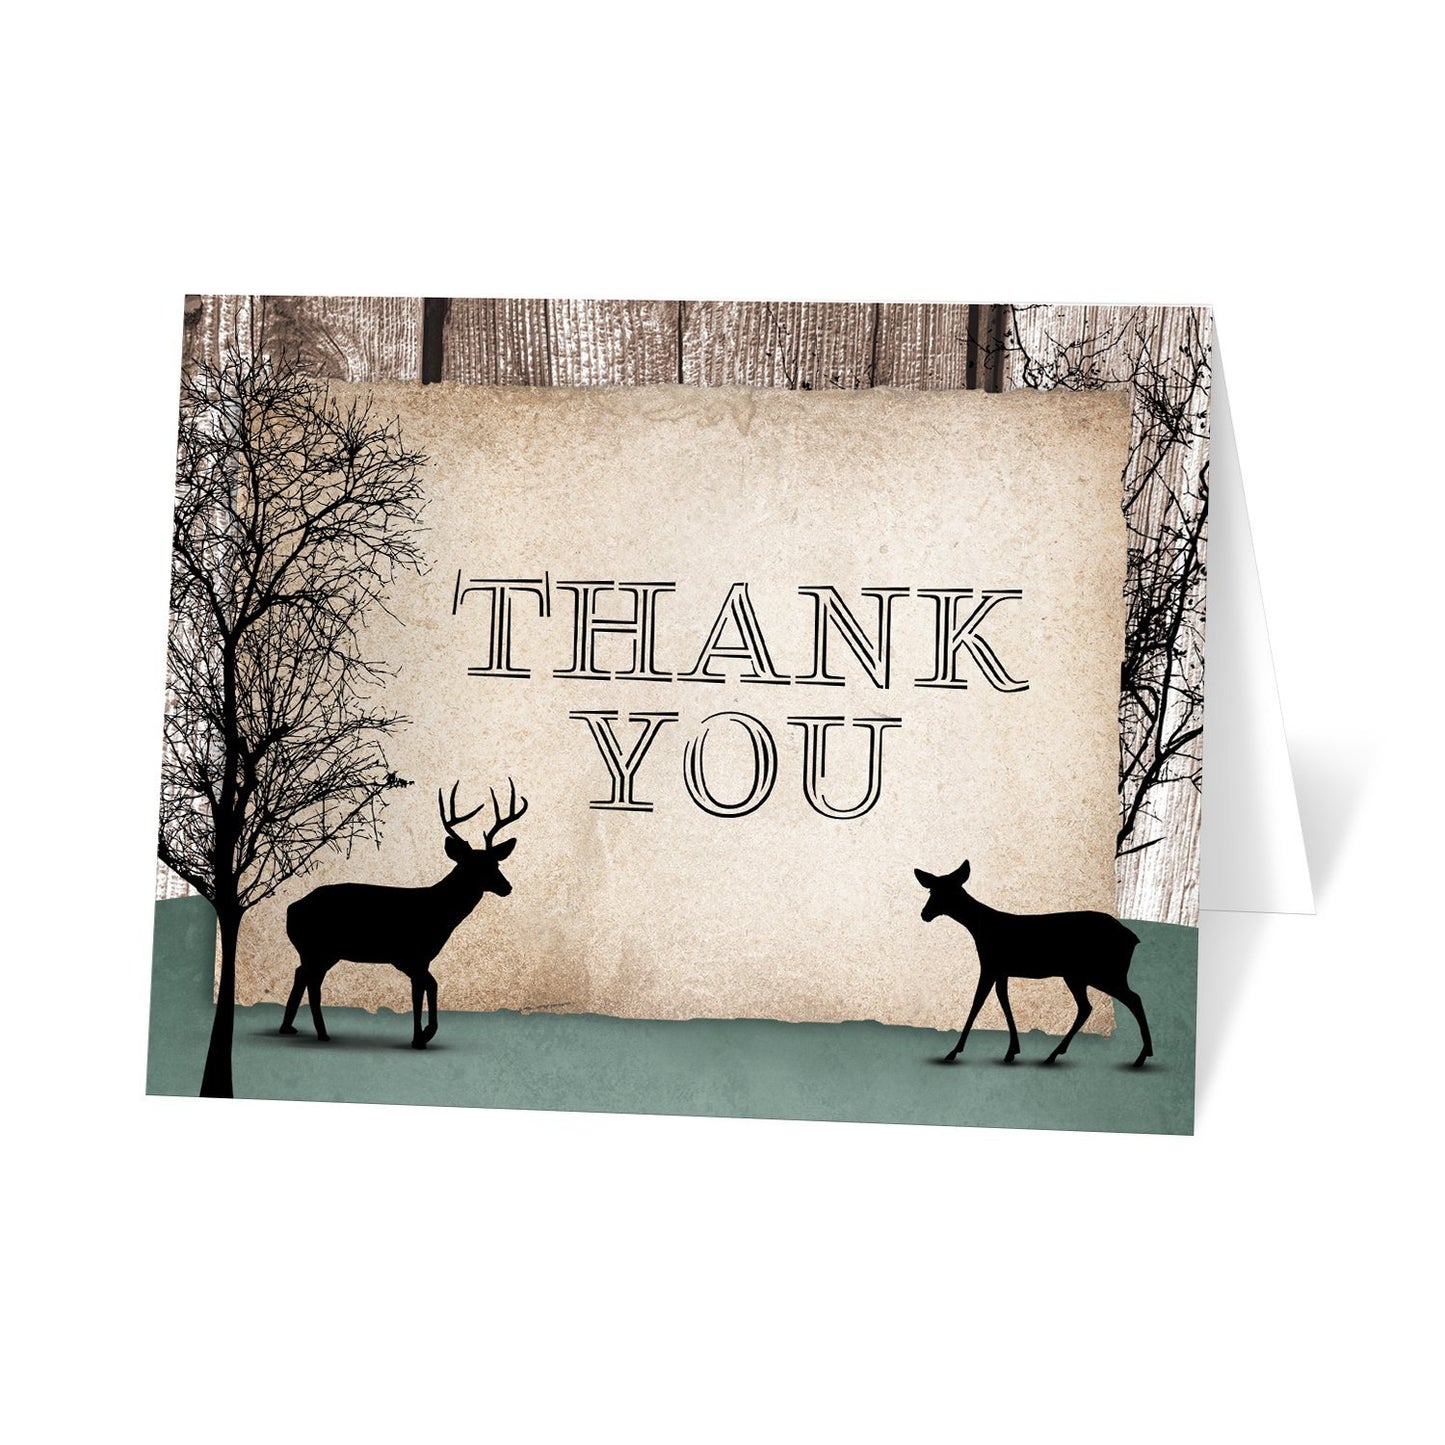 Rustic Woodsy Deer Thank You Cards at Artistically Invited